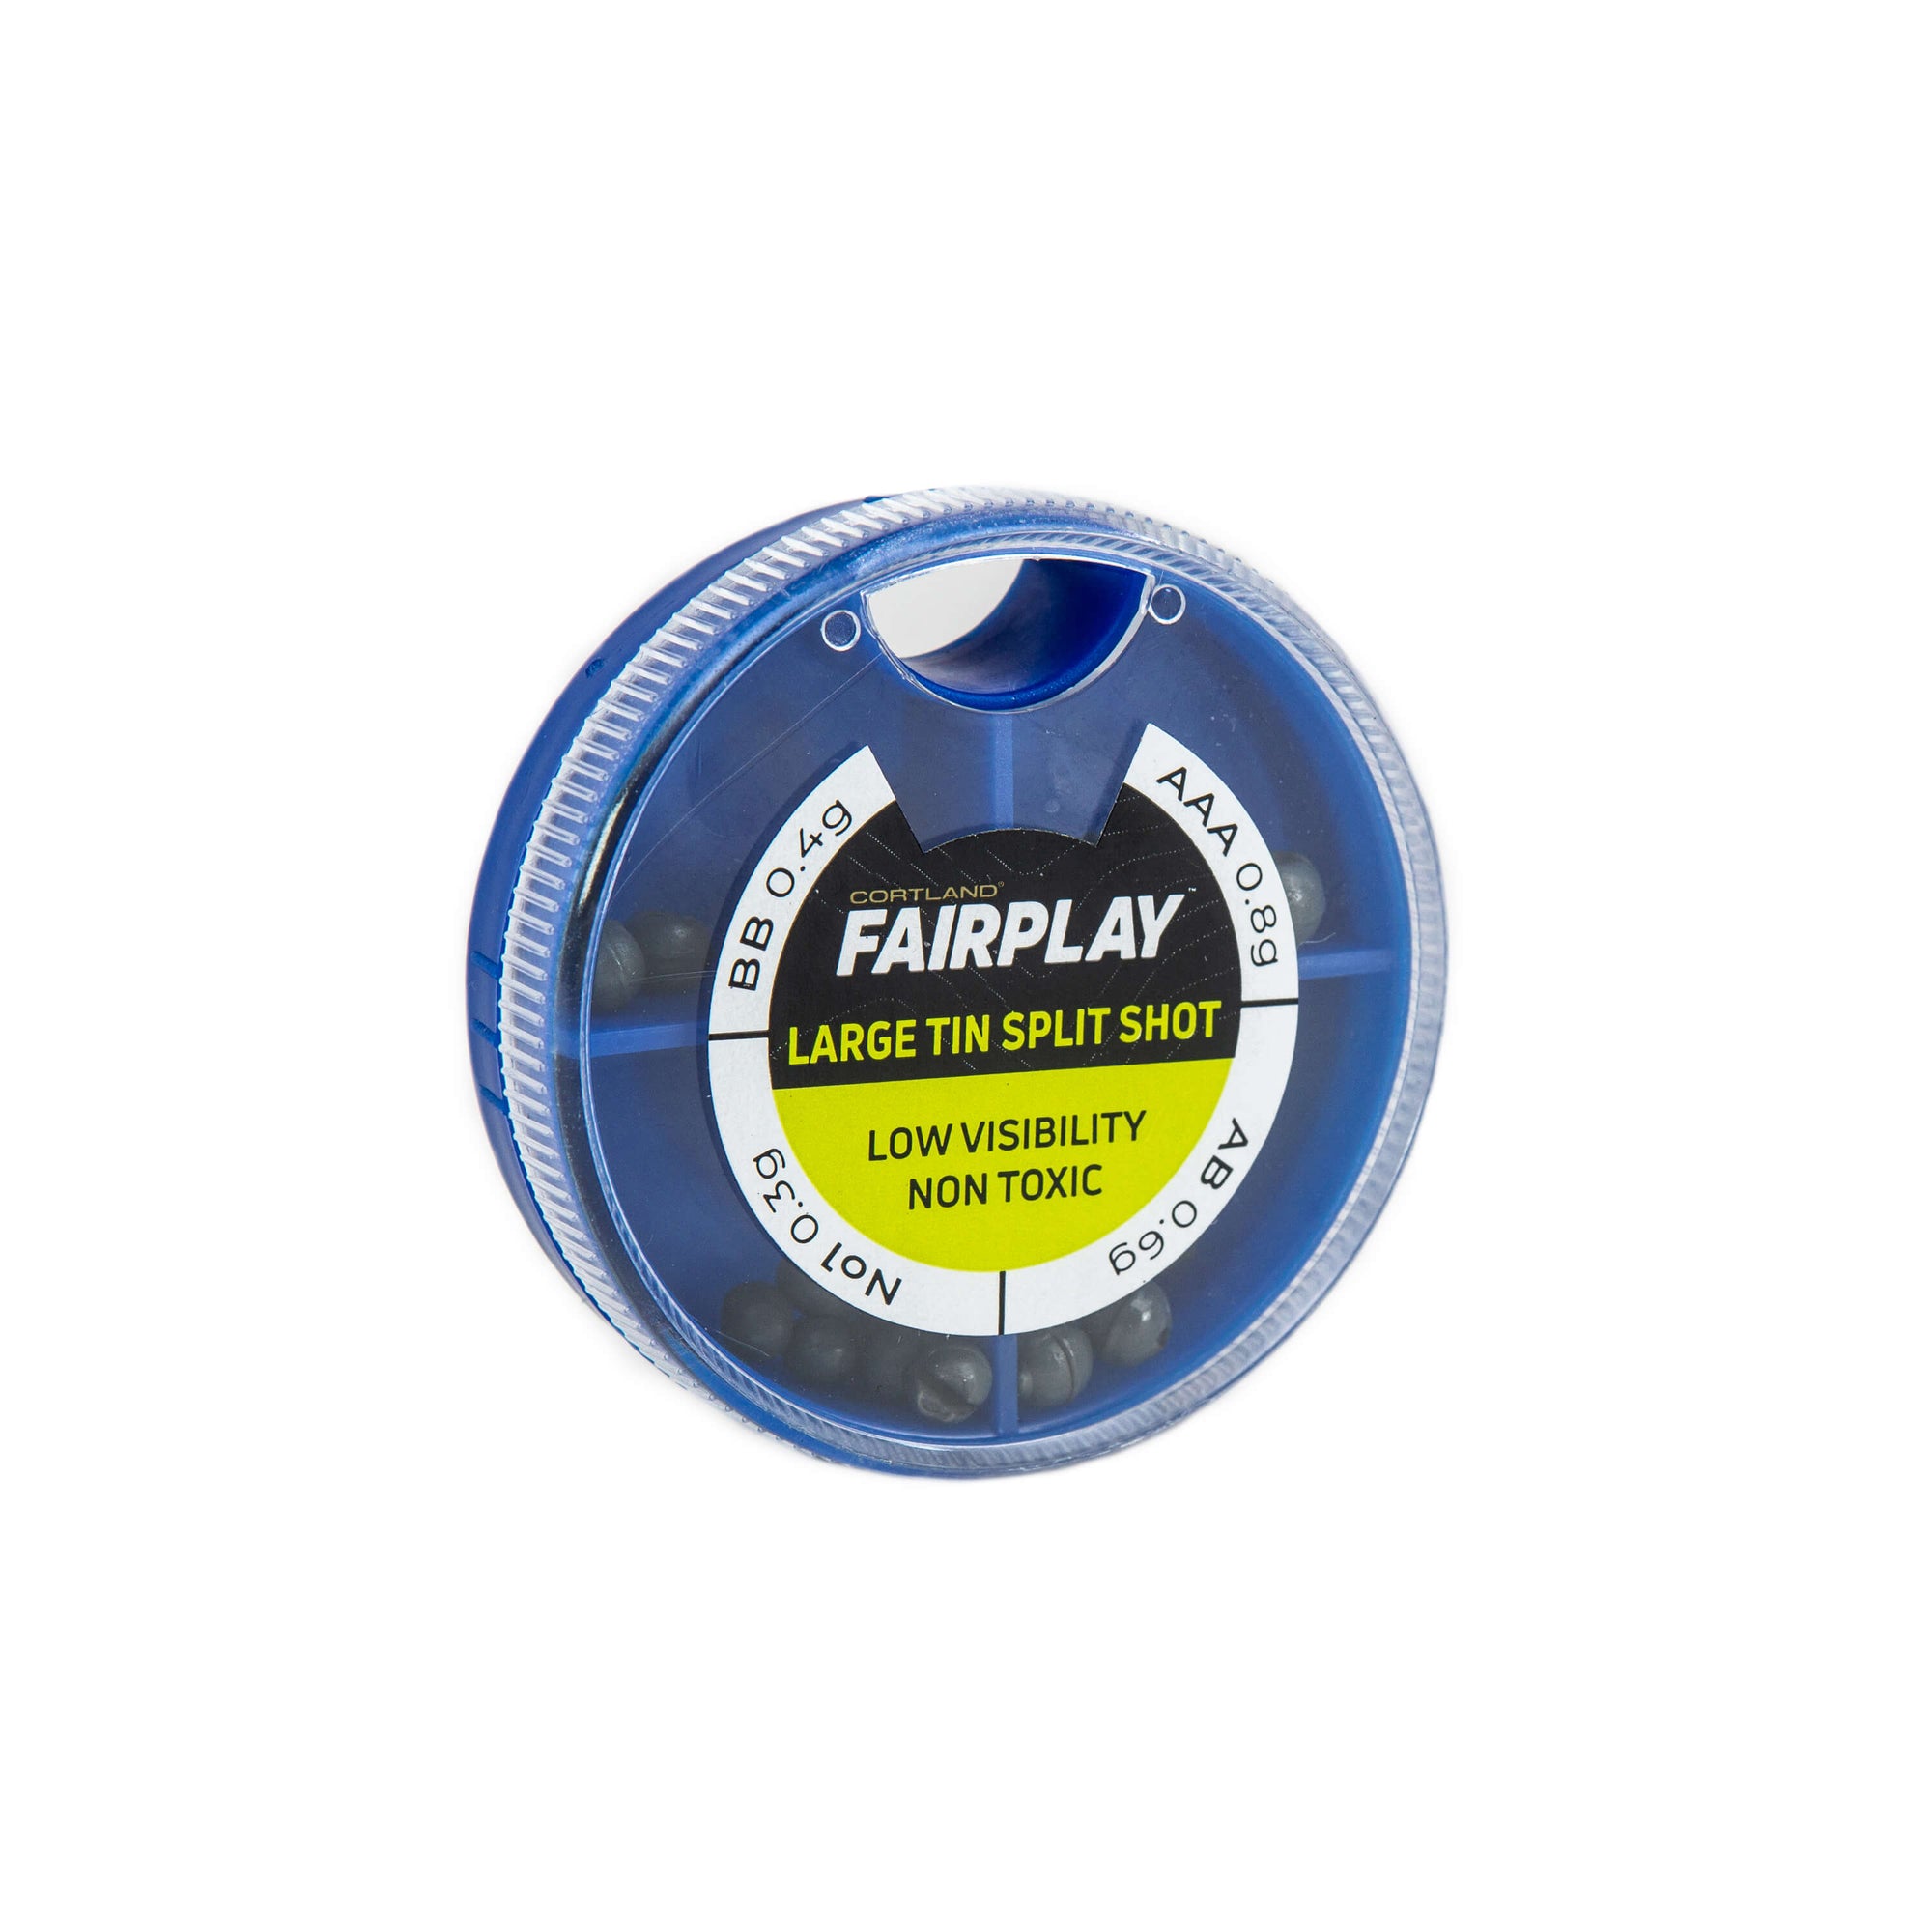 Fairplay Large Tin Split Shot in its blue plastic container